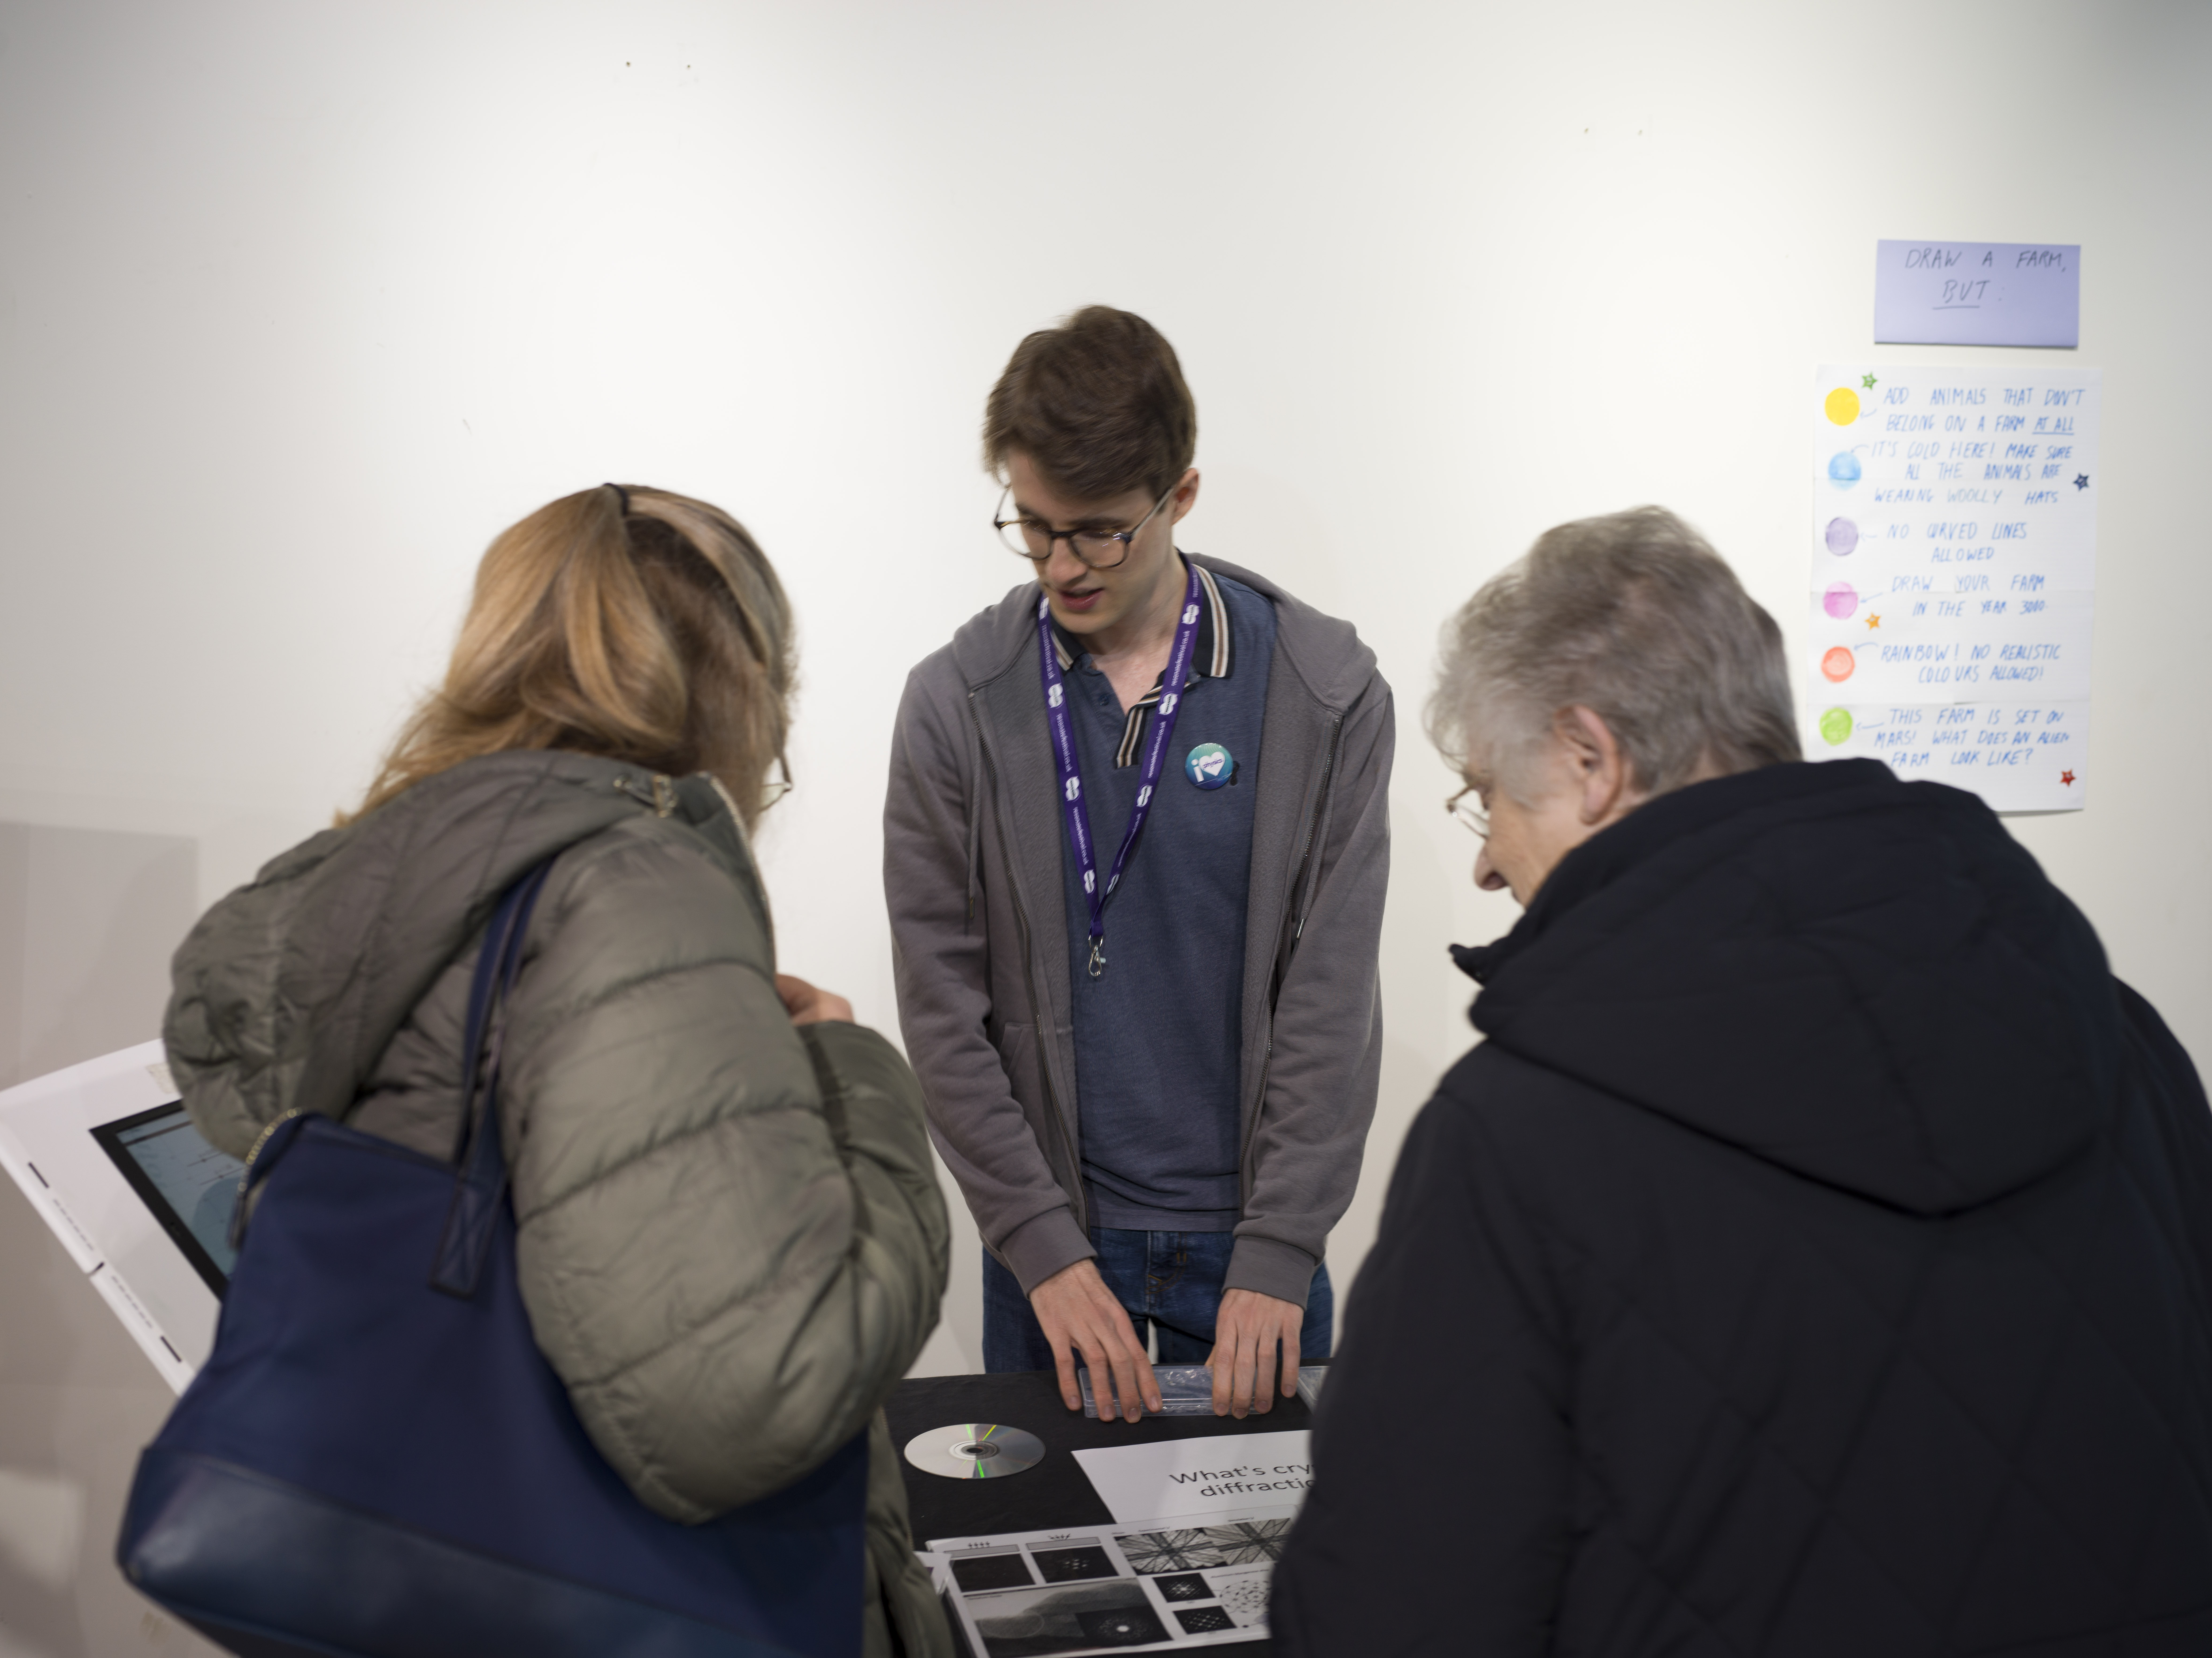 A student talking to two members of the public. They have a table with objects on it, including a CD, and an iPad on a stand. 